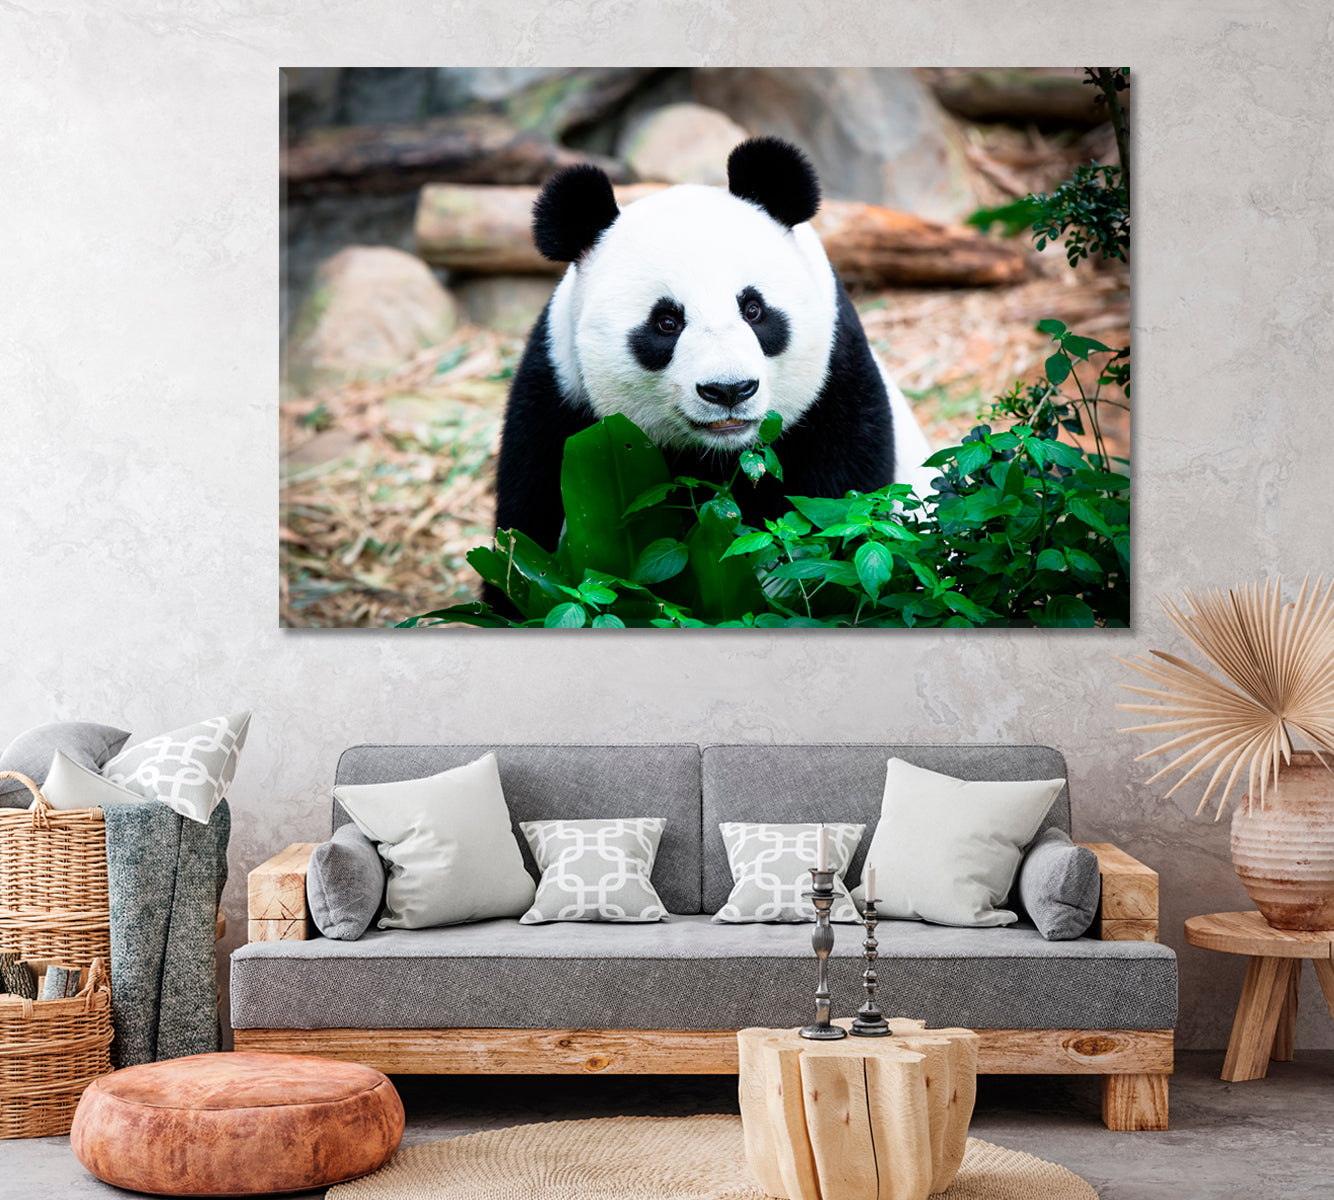 Giant Panda Forest Singapore Canvas Print ArtLexy 1 Panel 24"x16" inches 